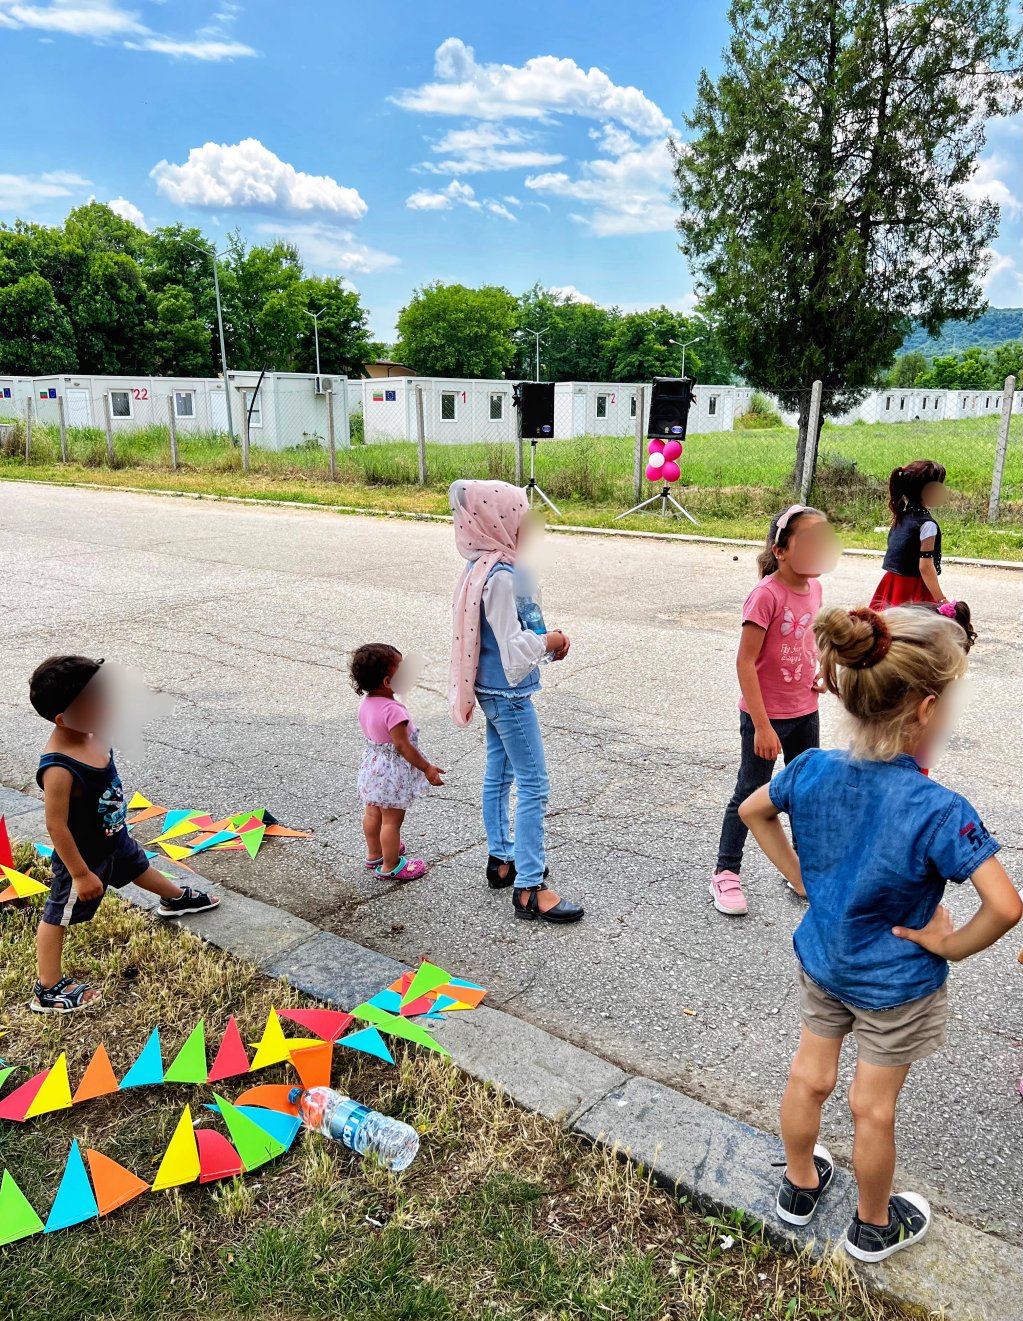 There are 276 are children at the Harmanli refugee reception center – 81 of whom are unaccompanied minors. June 20, 2023. | Photo: Sou-Jie van Brunnersum/InfoMigrants